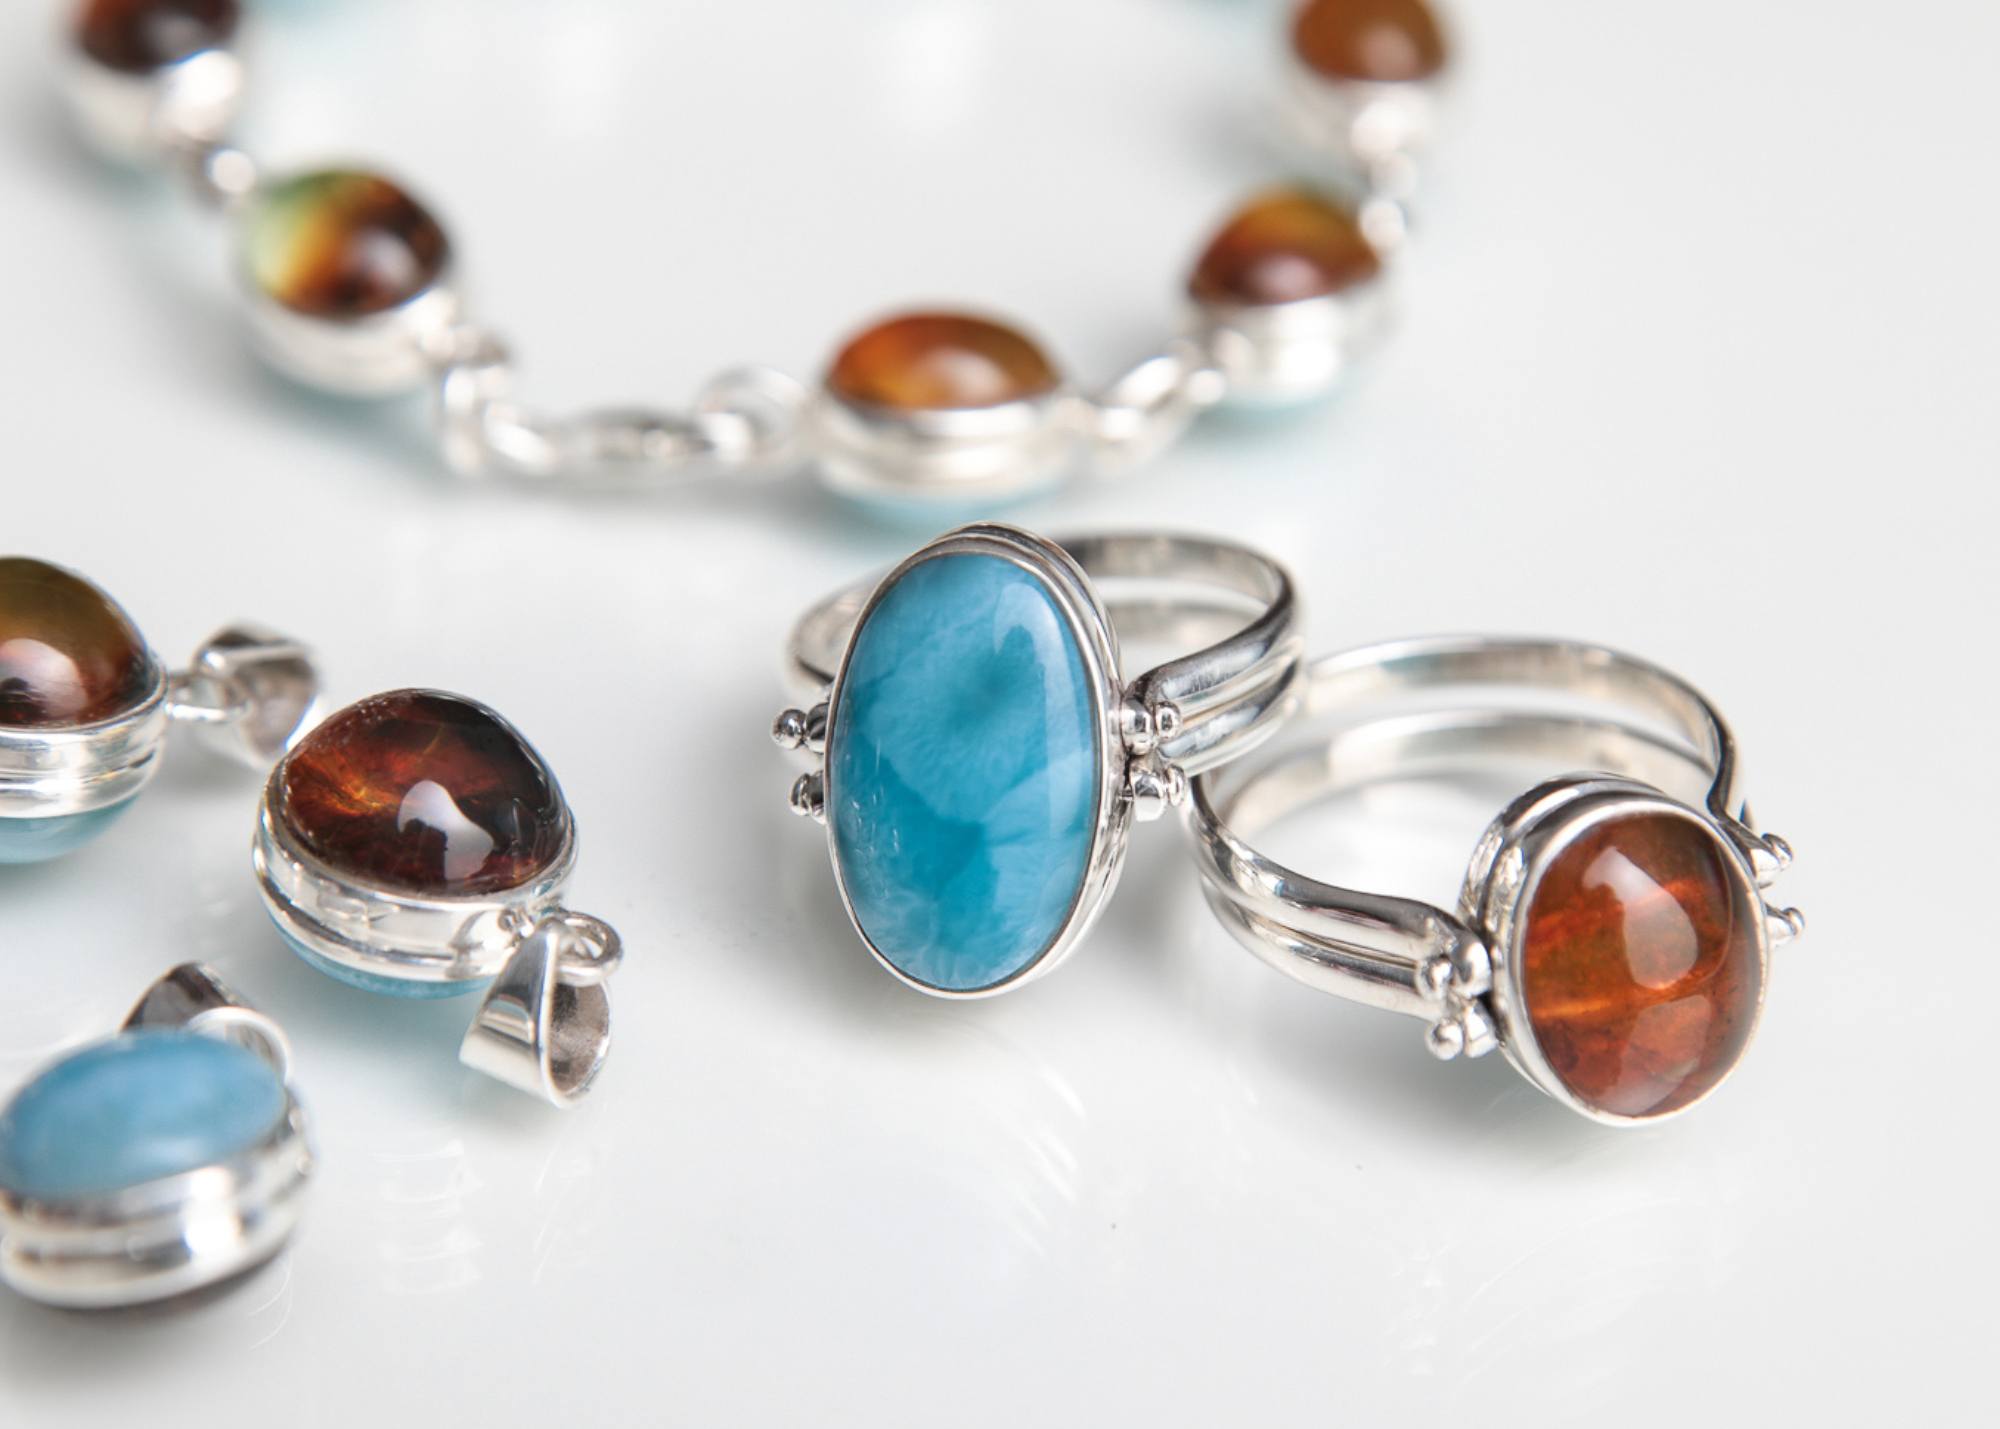 Beautiful and chic is the combination of Amber and Larimar. Find them all at The Larimar Shop